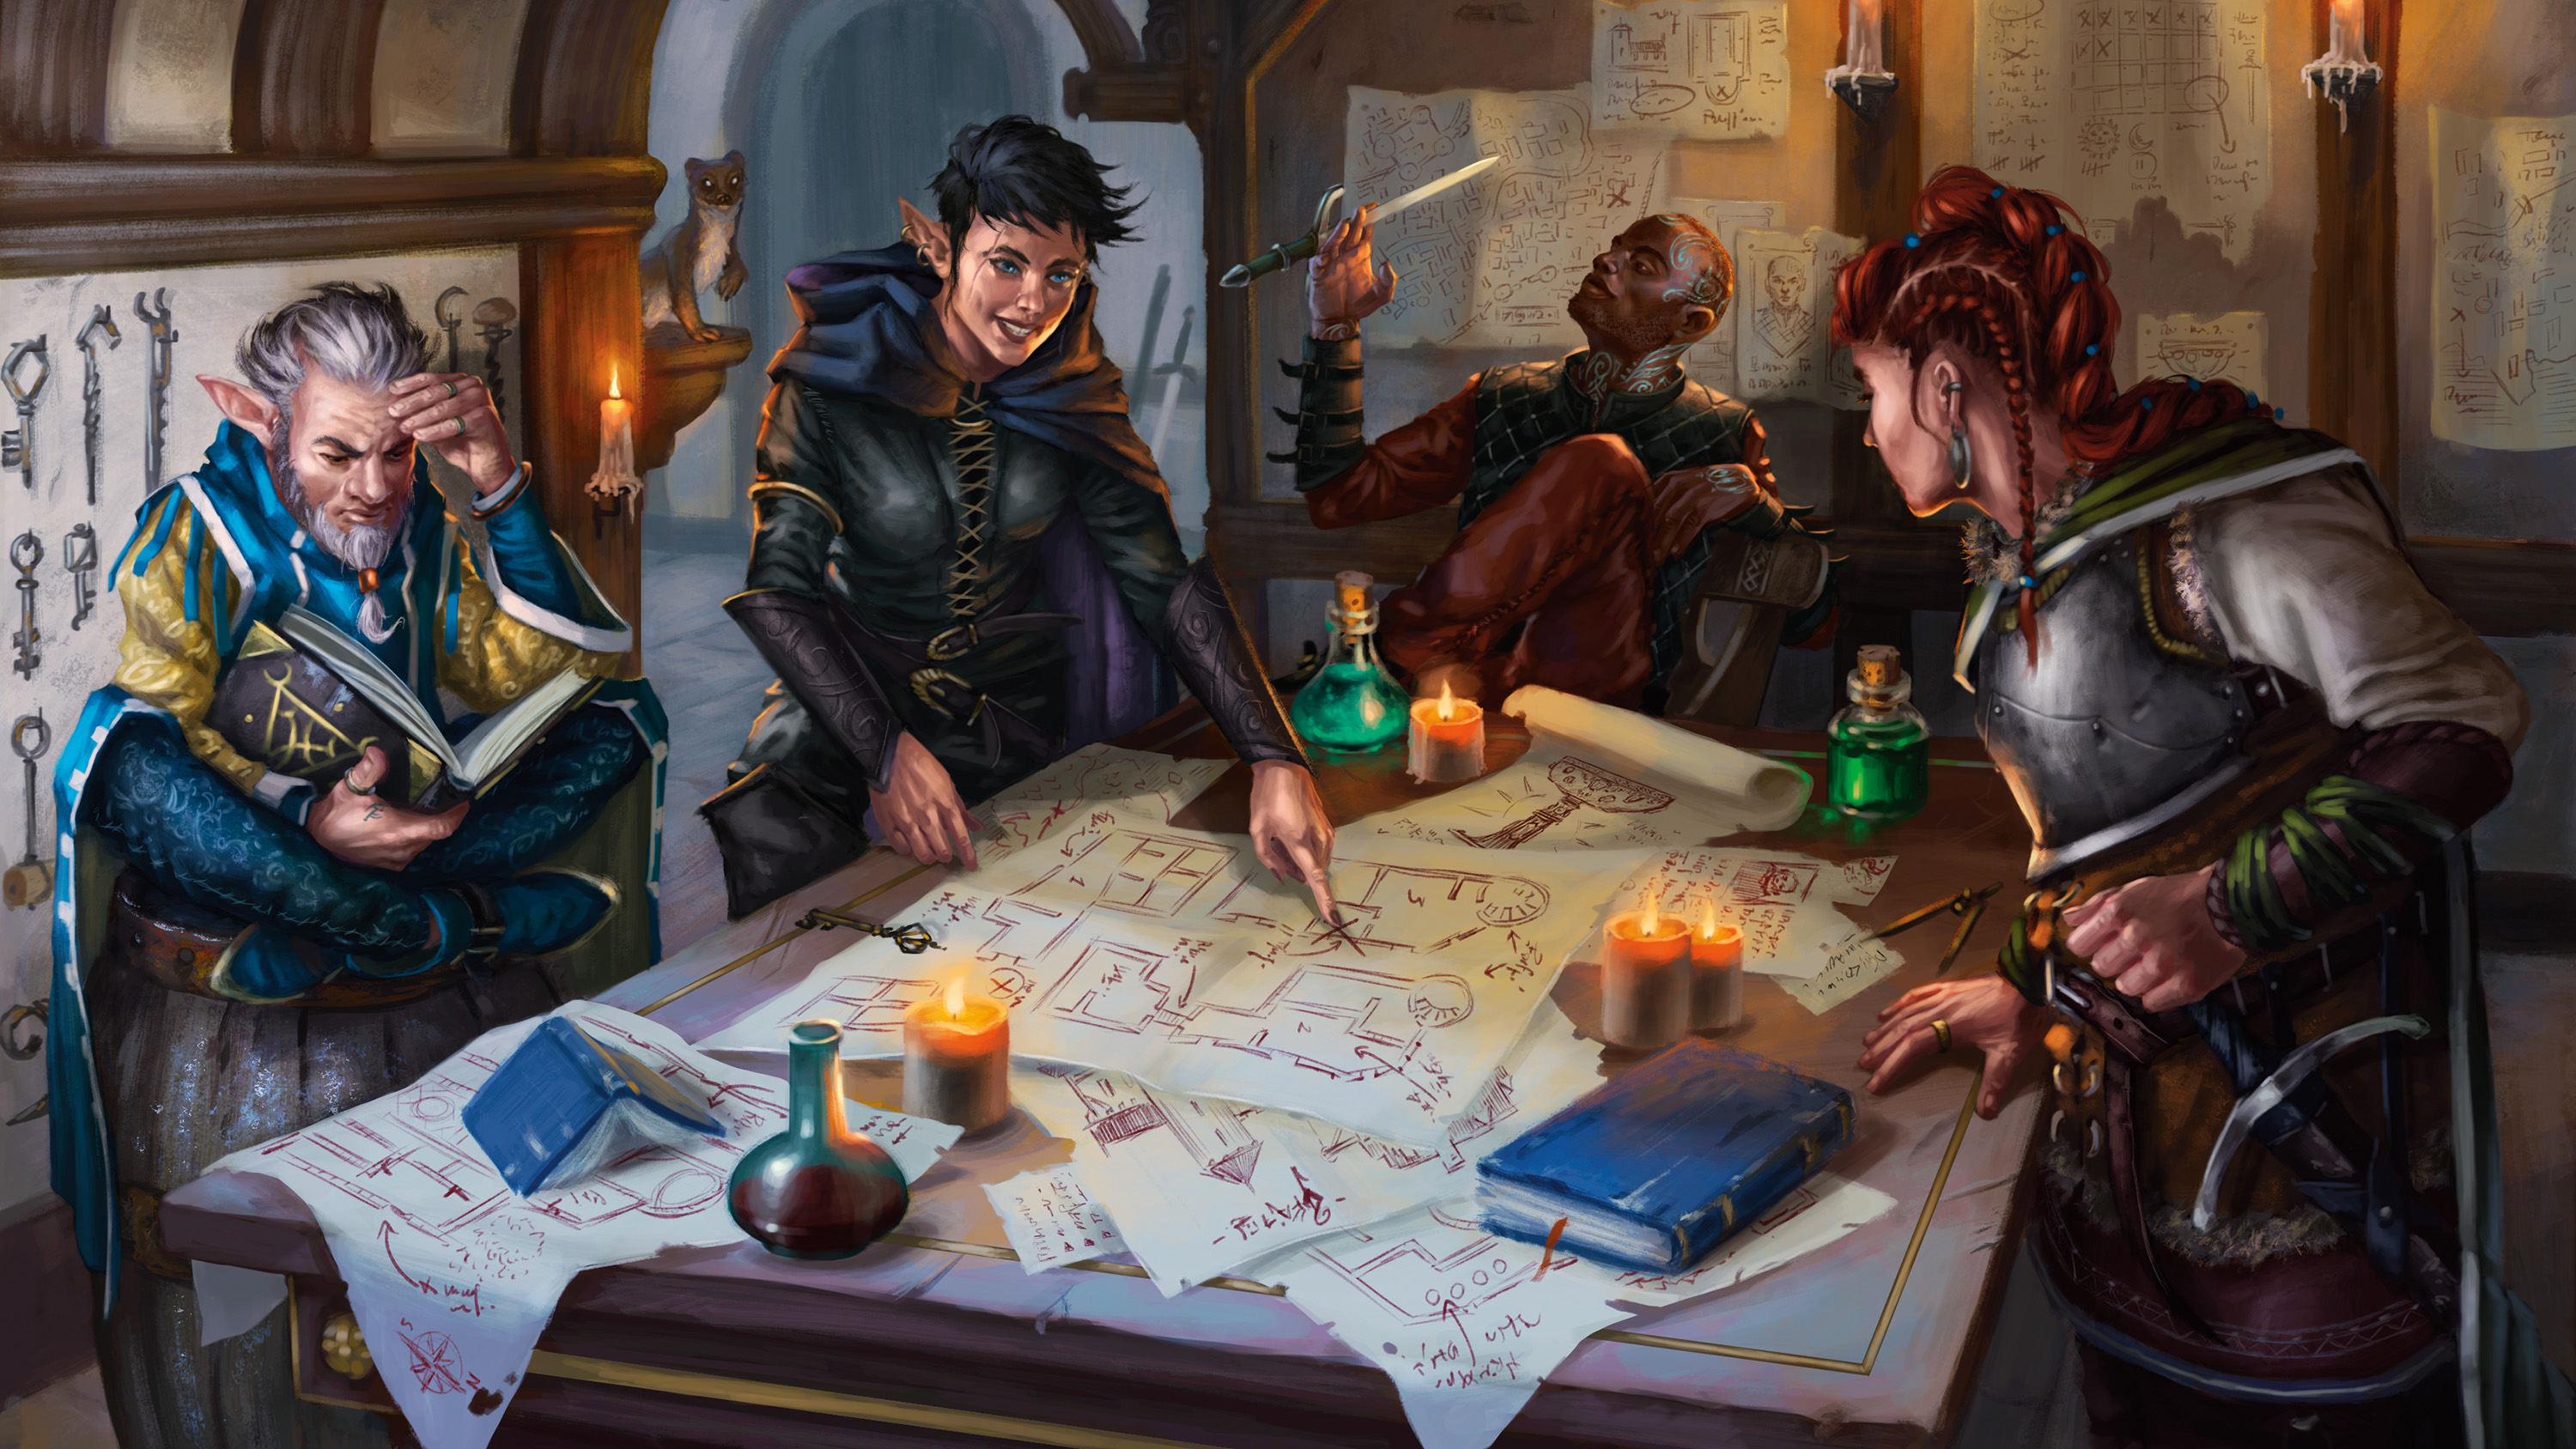 A group of four adventurers puzzle of a map. Candles burn, while a ferret peers in from the adjoining room.